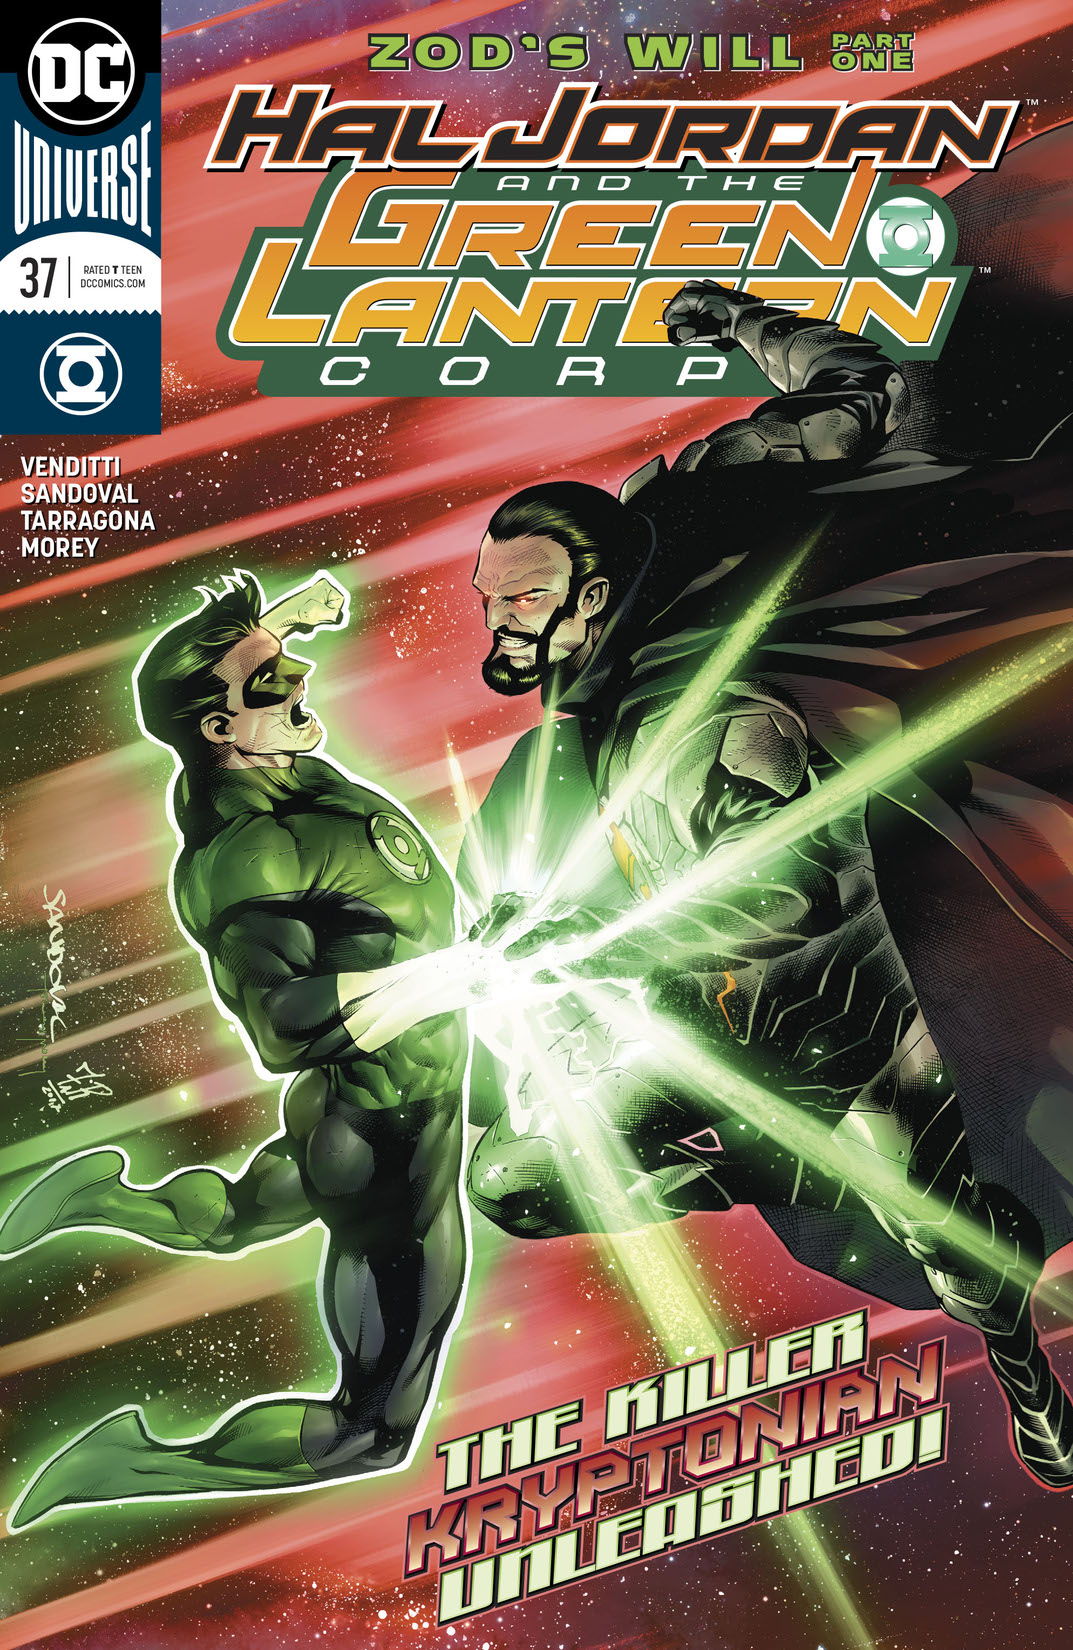 Hal Jordan and The Green Lantern Corps #37 preview images